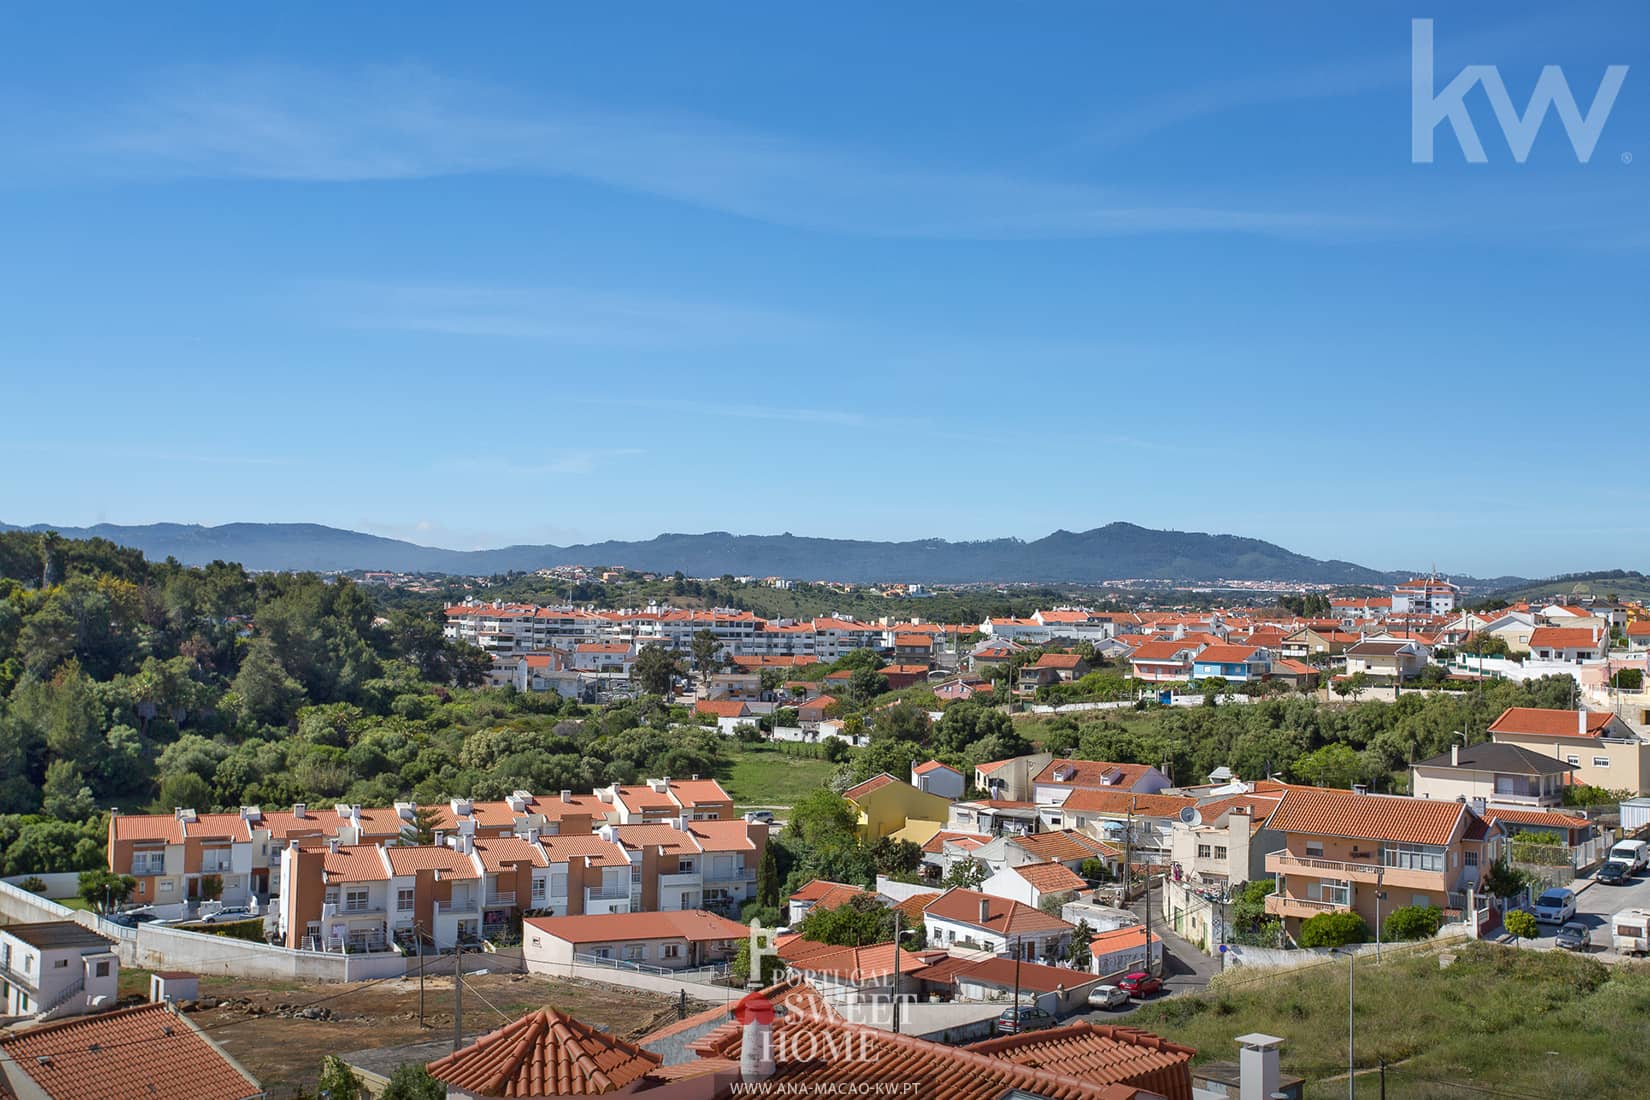 View to the mountain range of Sintra